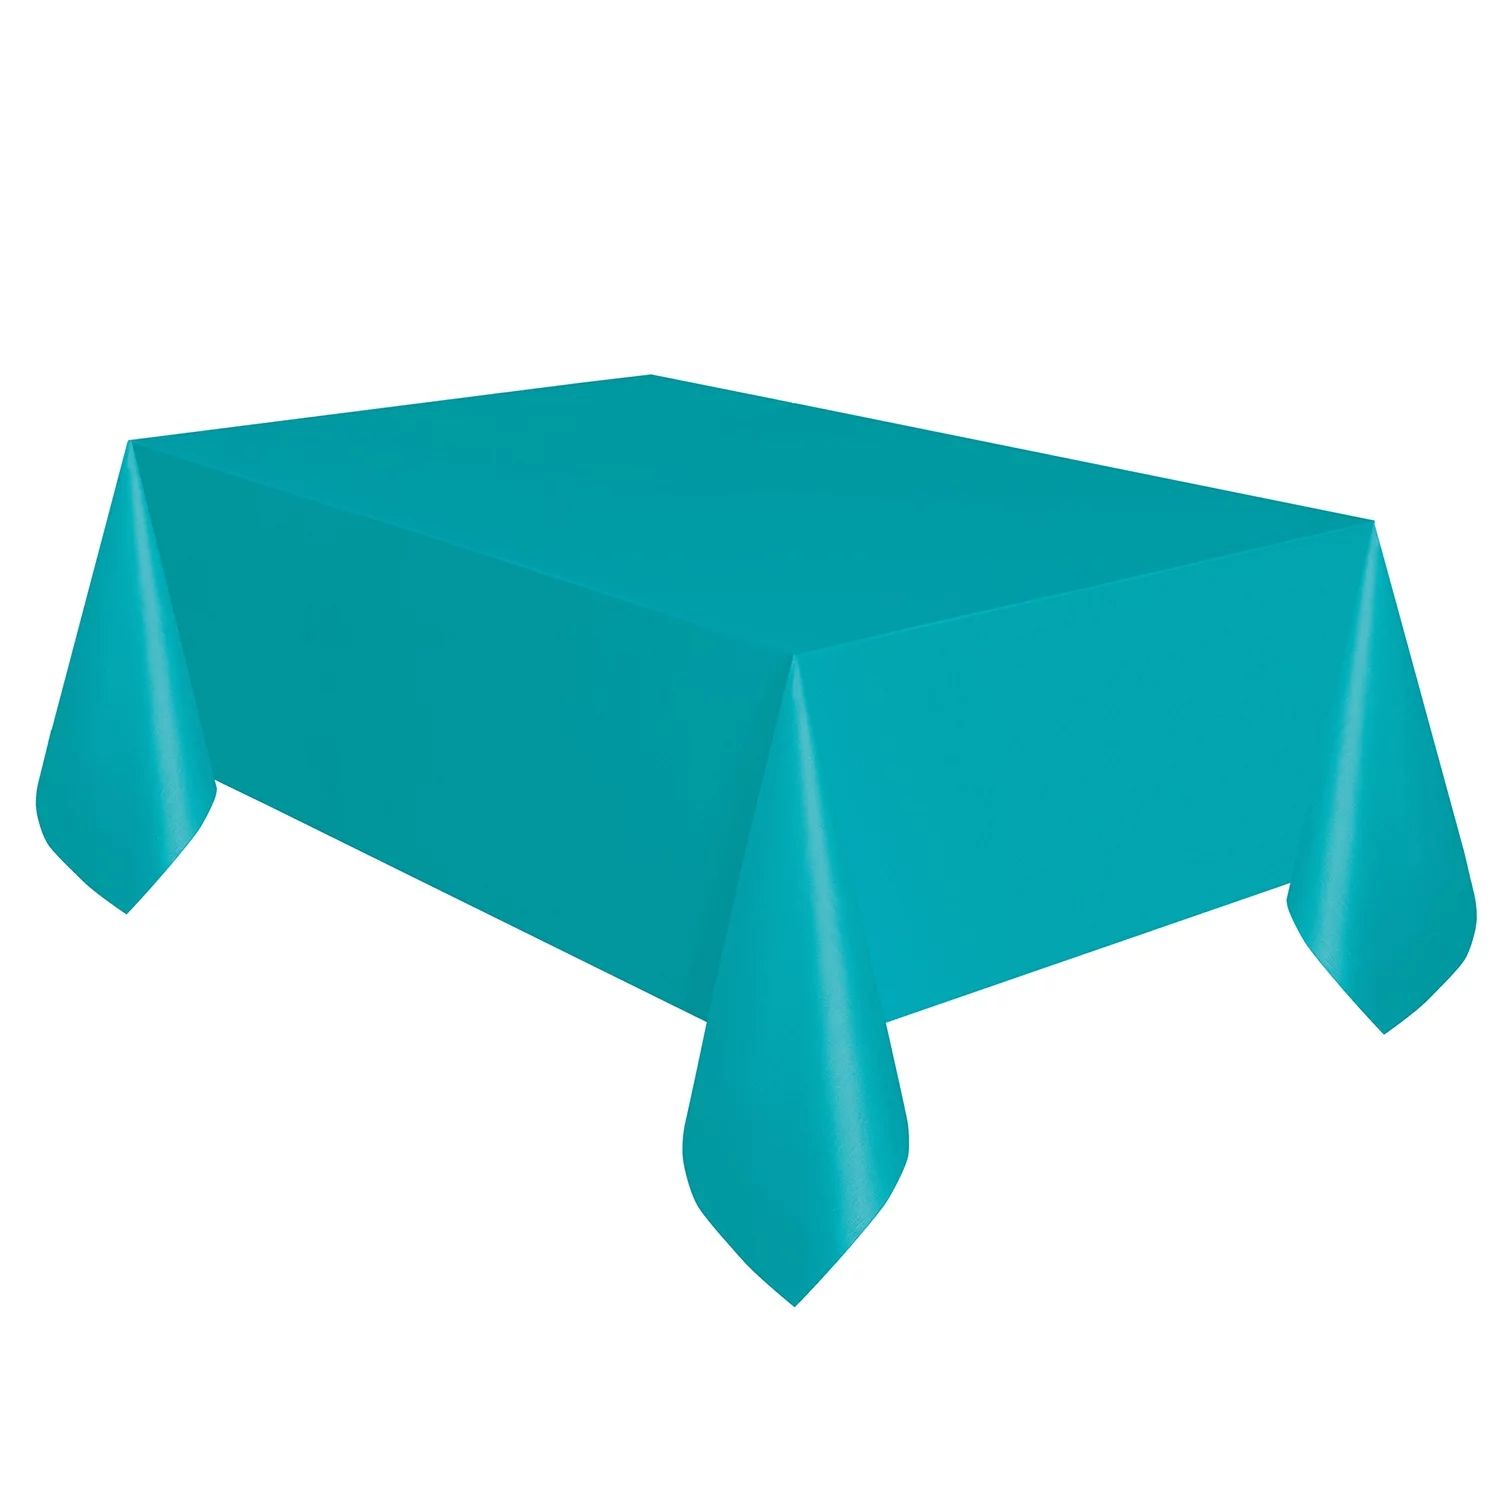 Way To Celebrate! Plastic Party Tablecloths, 108 x 54in, Teal, 3ct | Walmart (US)